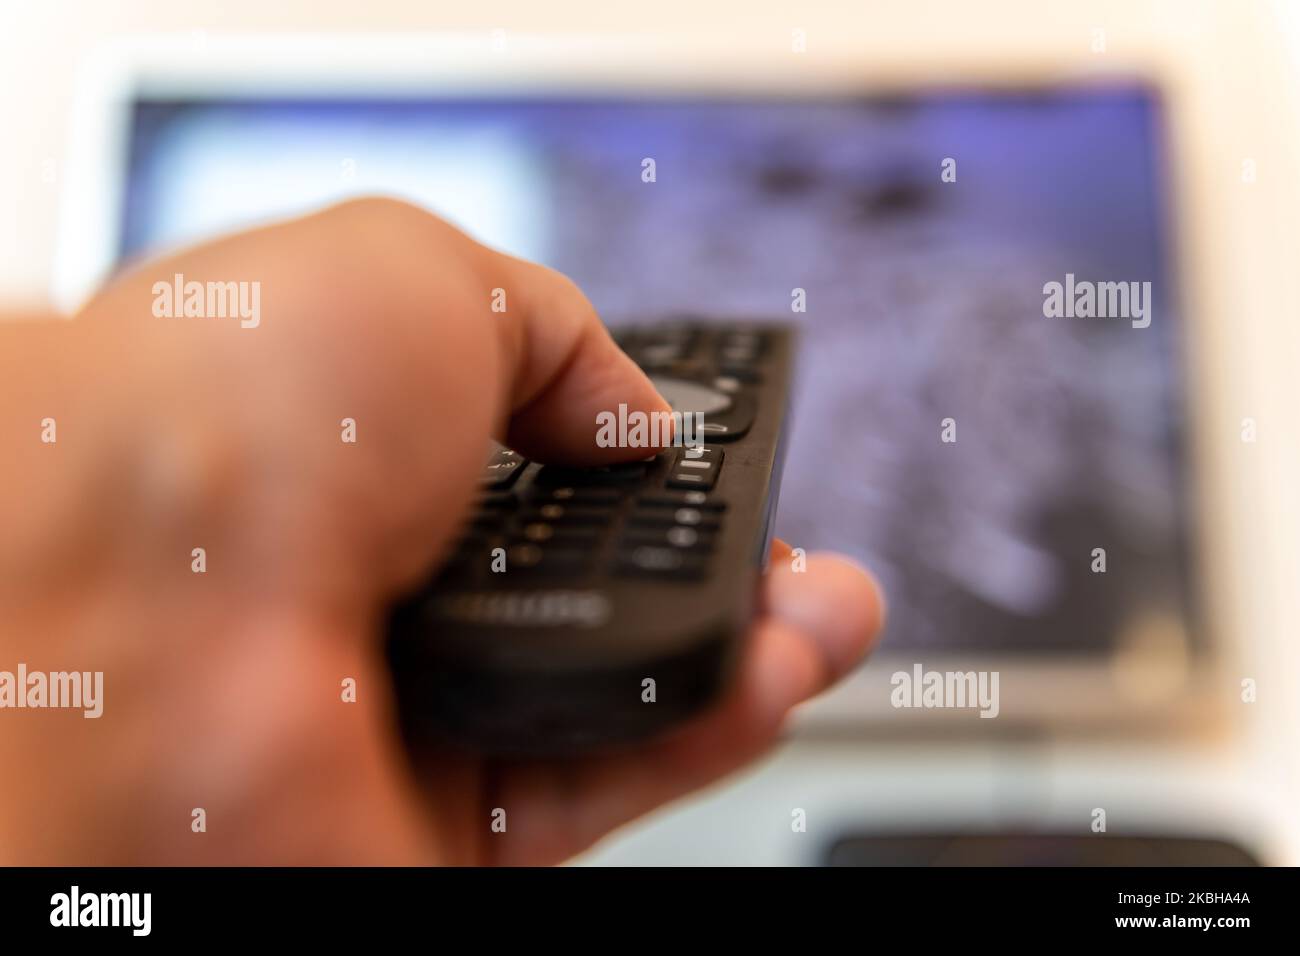 A person using the remote control of a television. Stock Photo